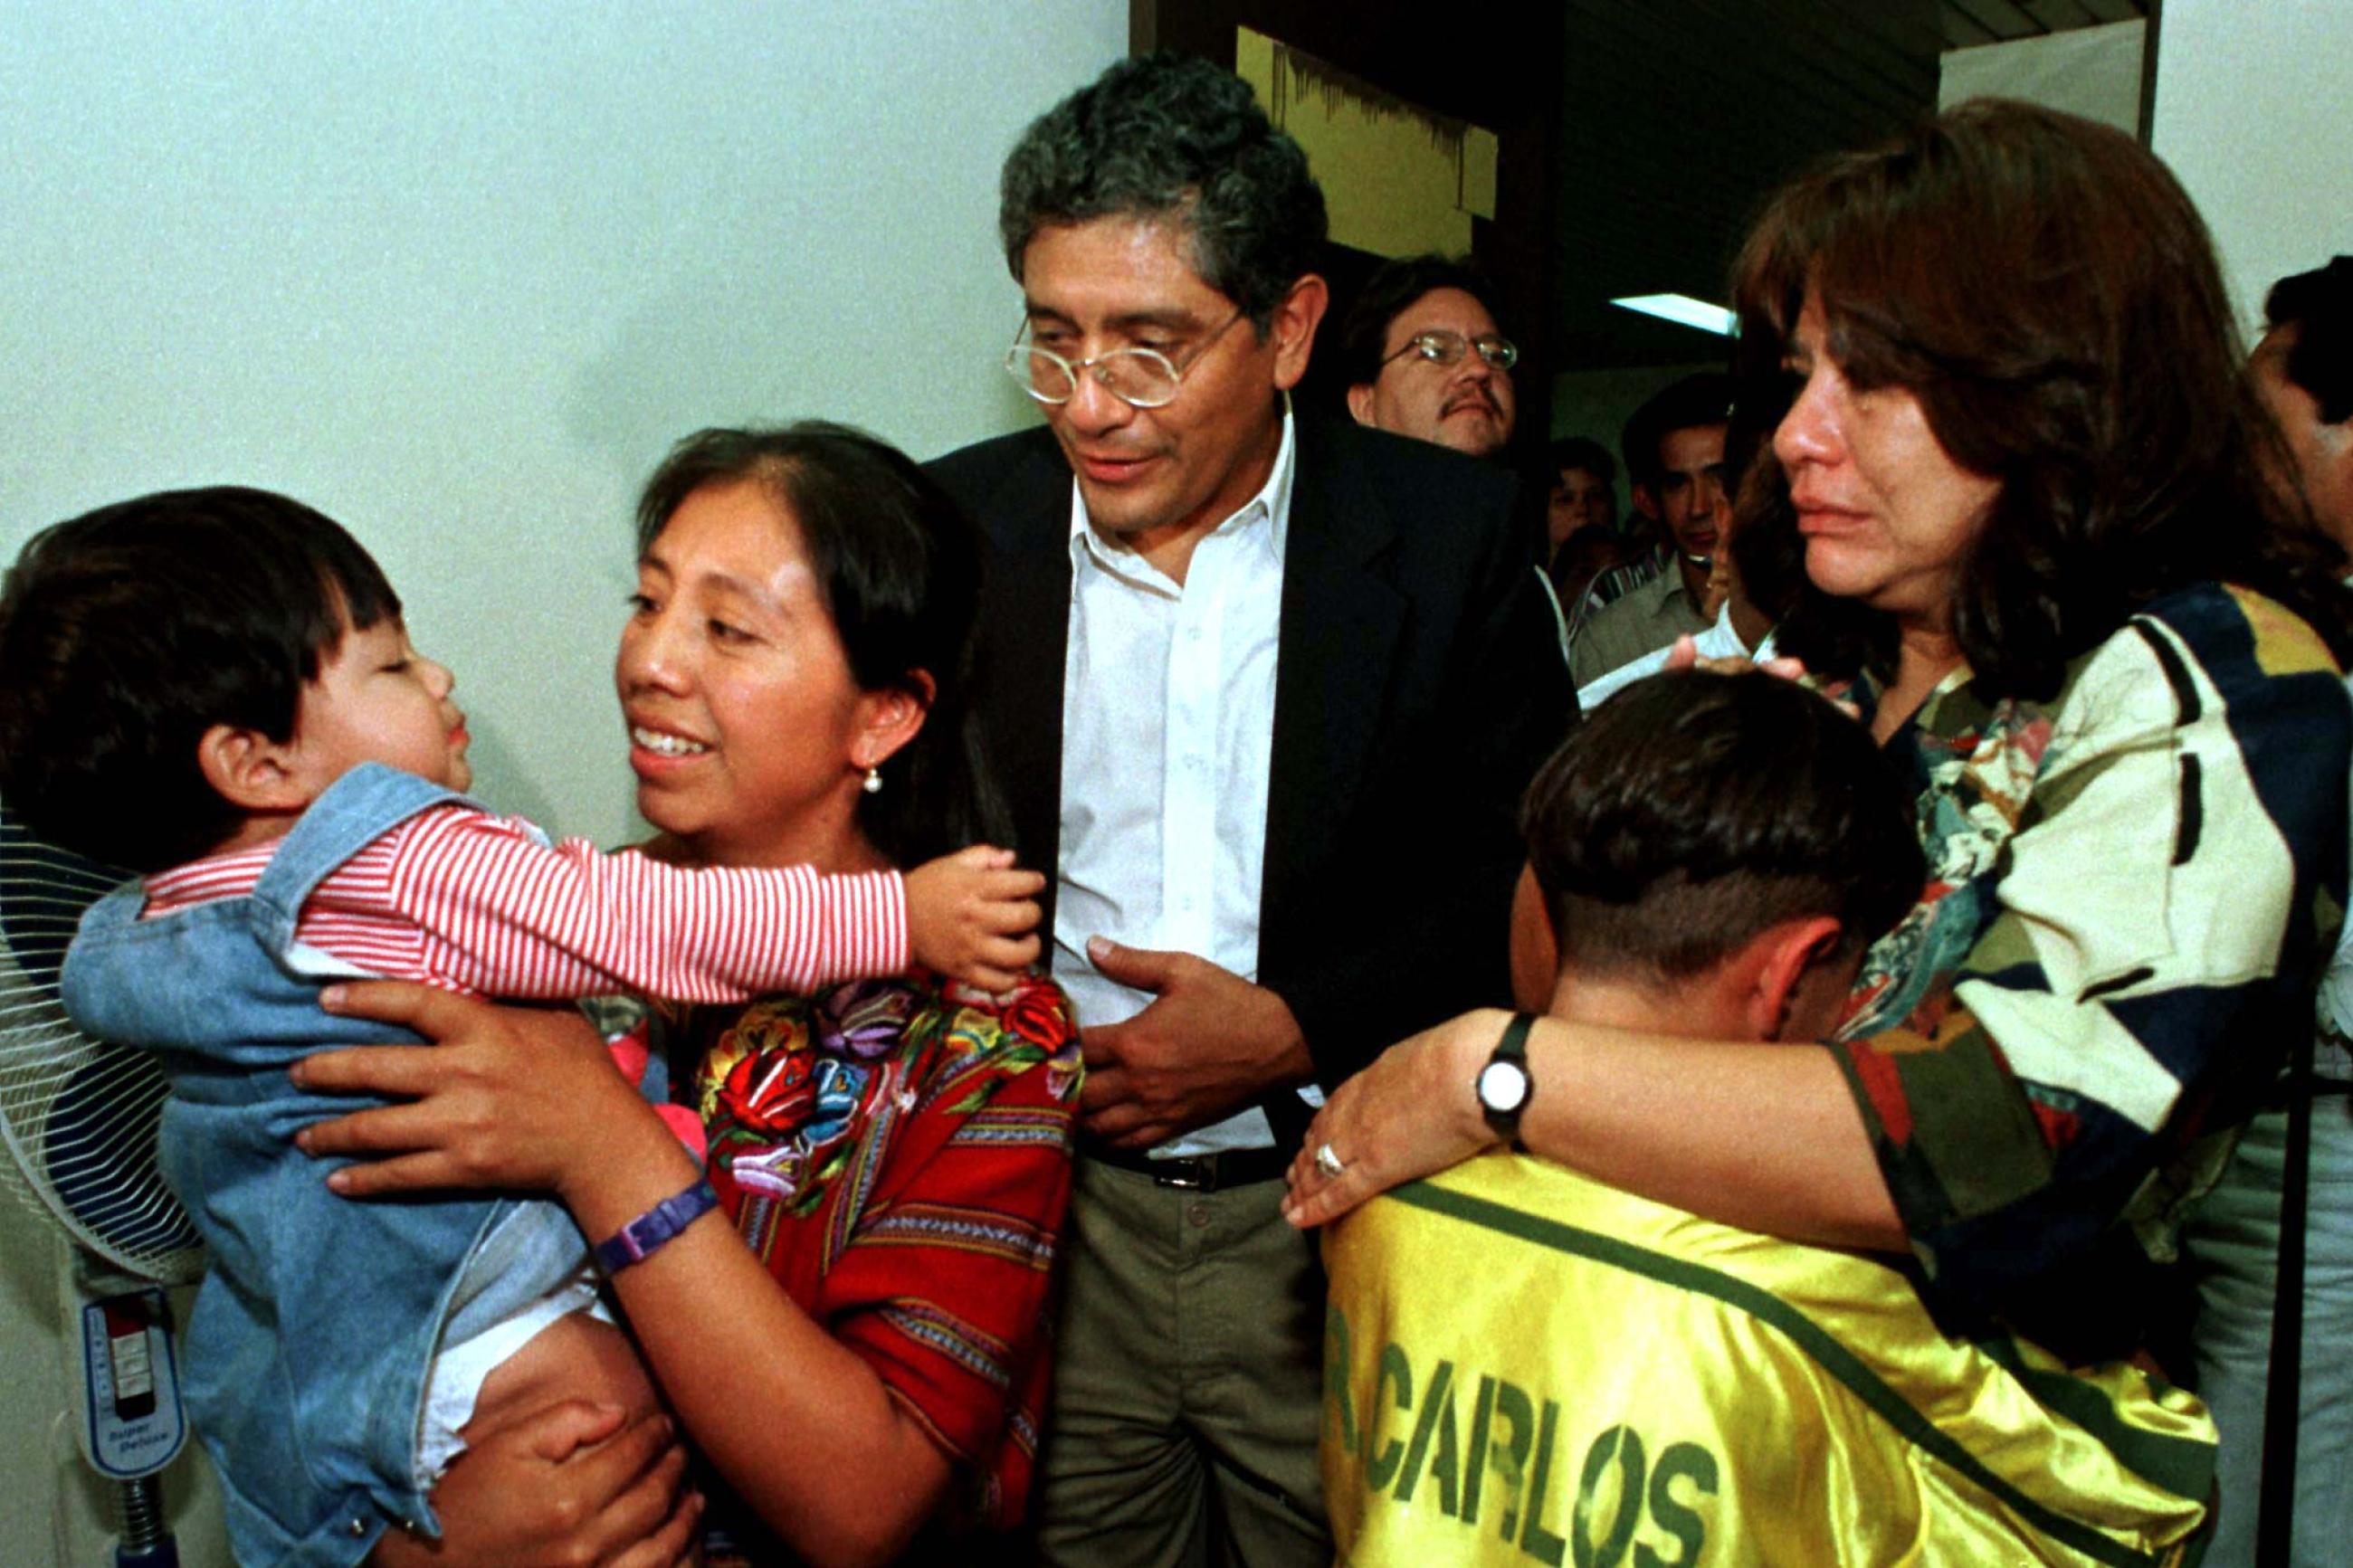 Elivia Ramirez holds her son, Pablito, after recovering him from a foster home in a landmark case, in Guatemala, on August 16, 1998. Elivia says that she was tricked into giving her son for adoption.